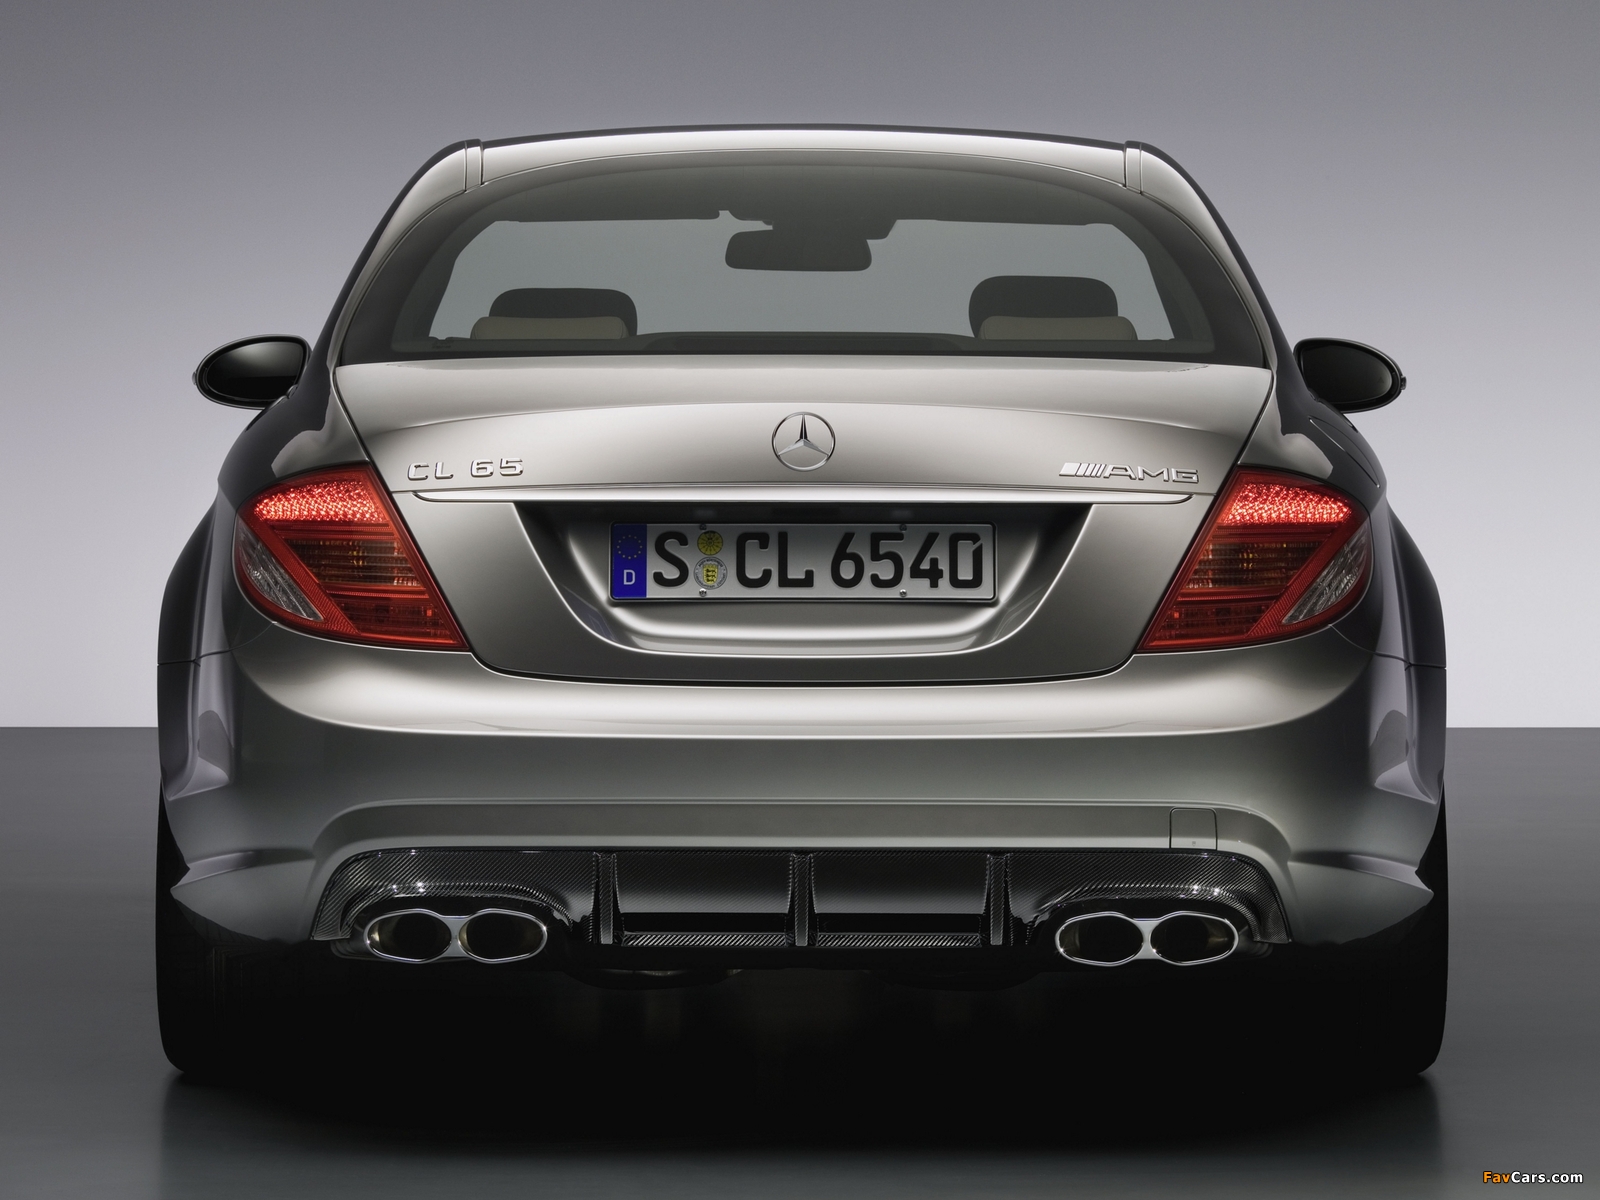 Mercedes-Benz CL 65 AMG 40th Anniversary (C216) 2007 images (1600 x 1200)